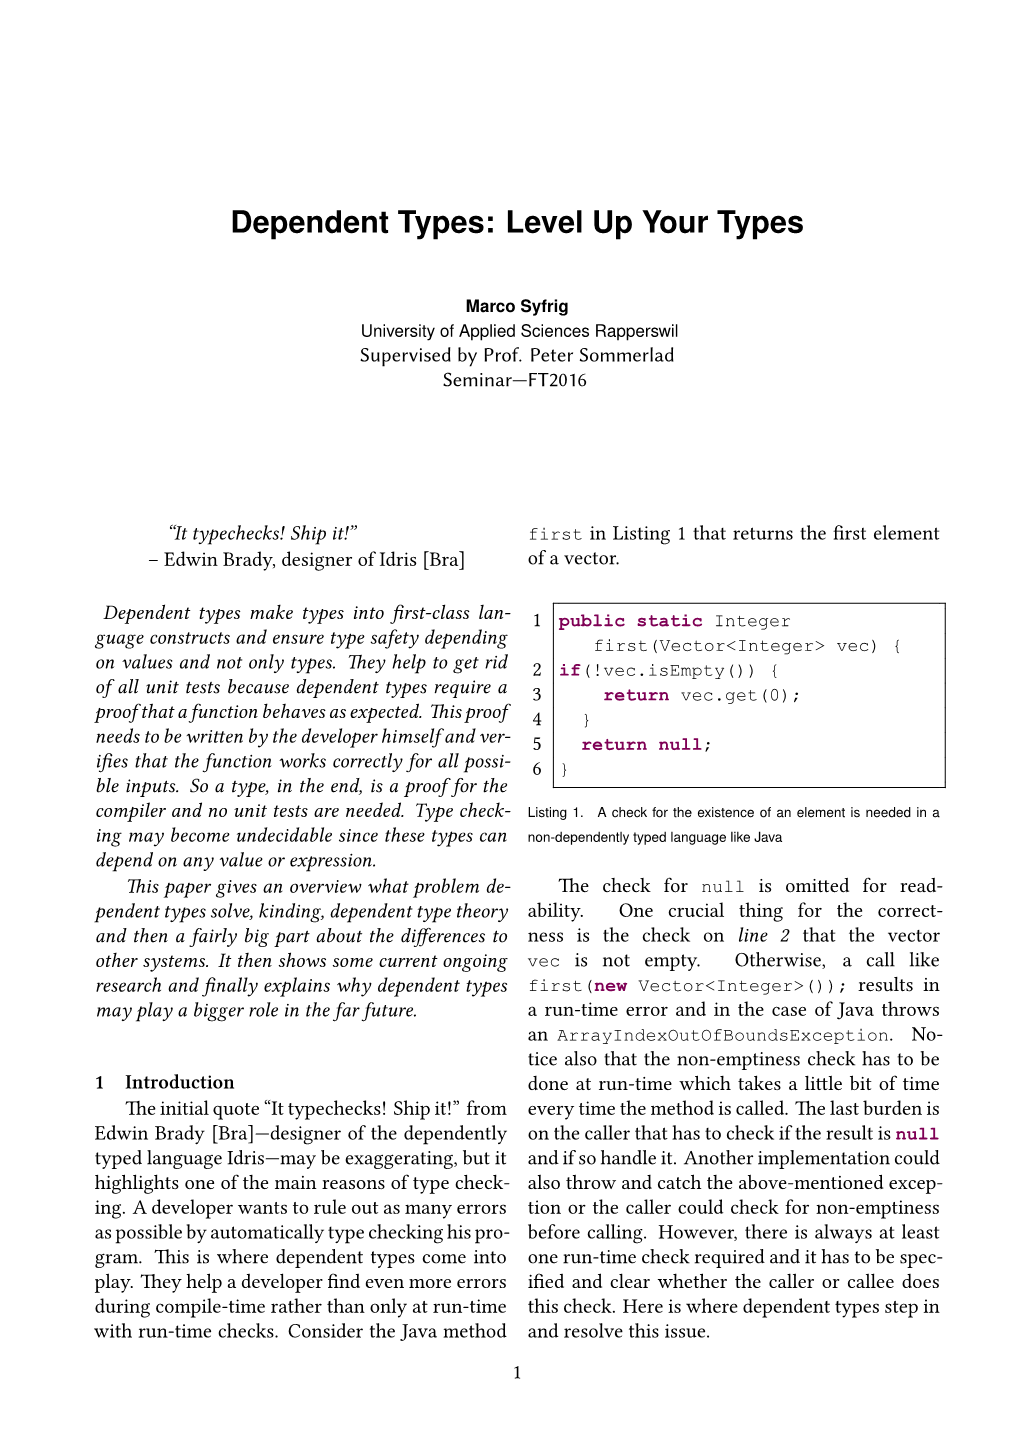 Dependent Types: Level up Your Types